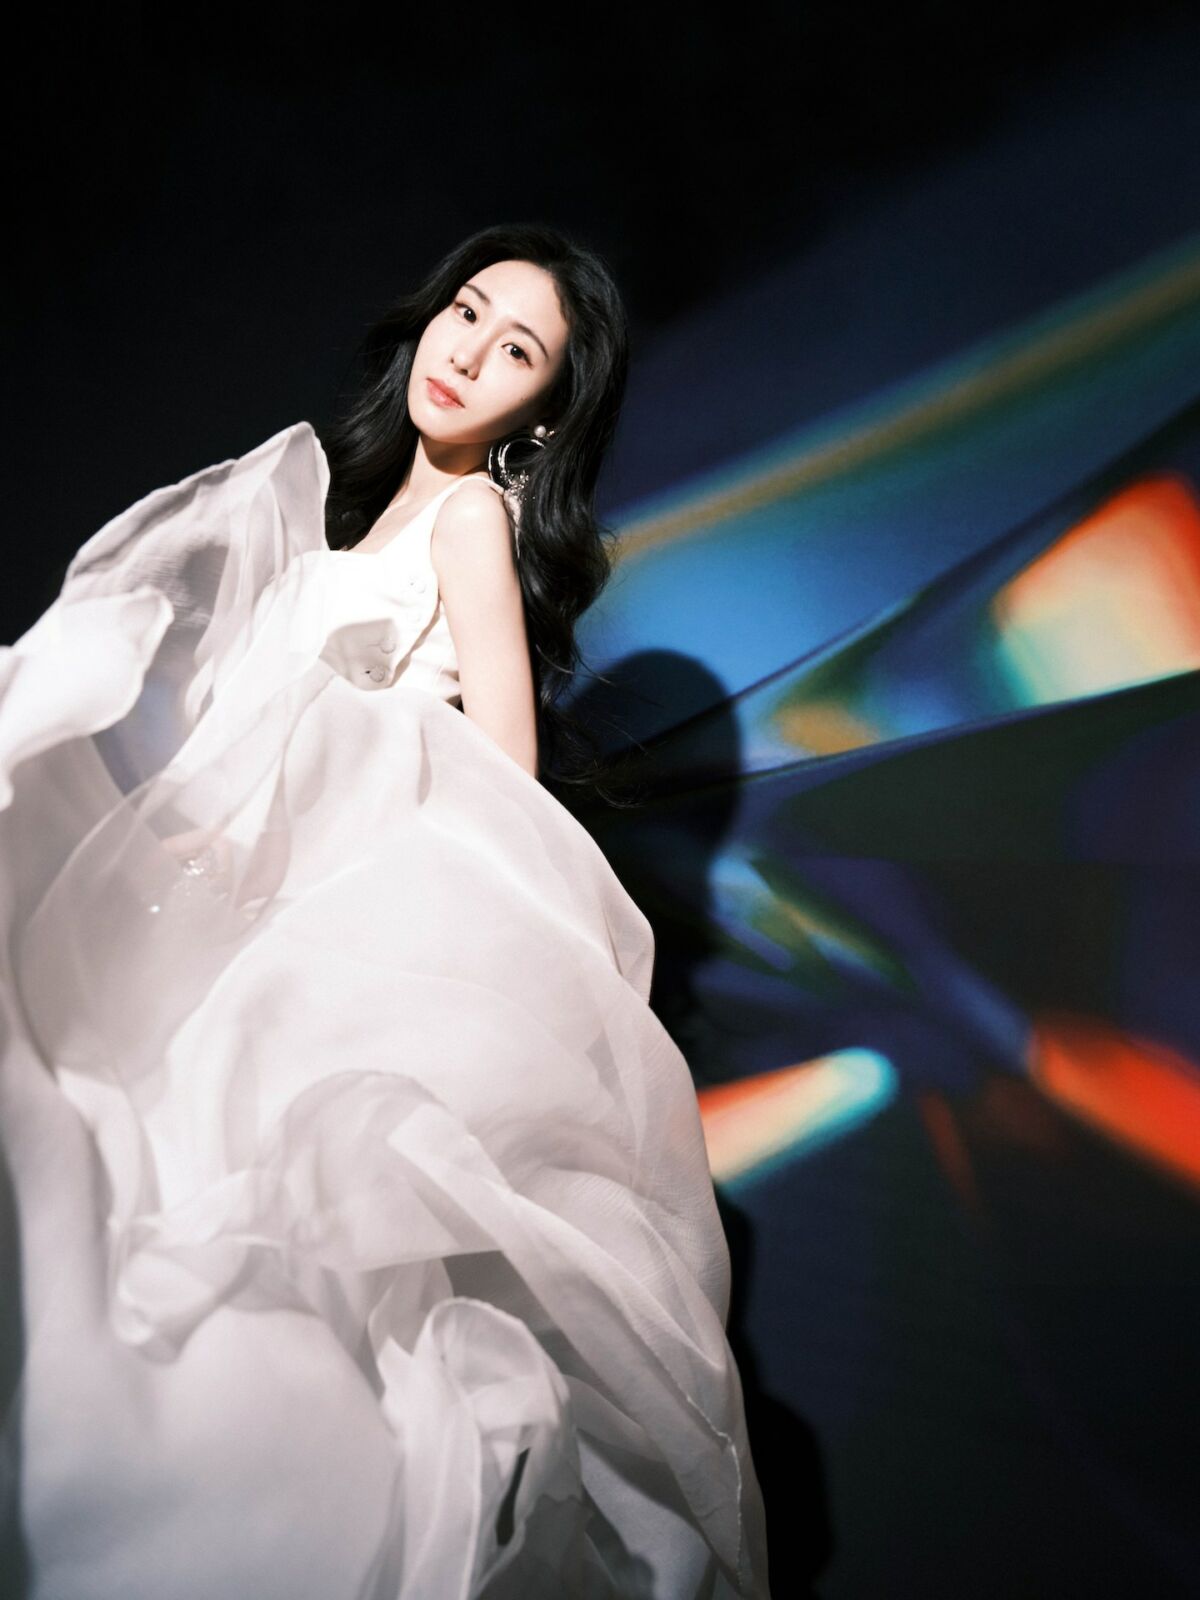 Chinese singer Diamond Zhang (张碧晨) in Julien Fournié Haute Couture